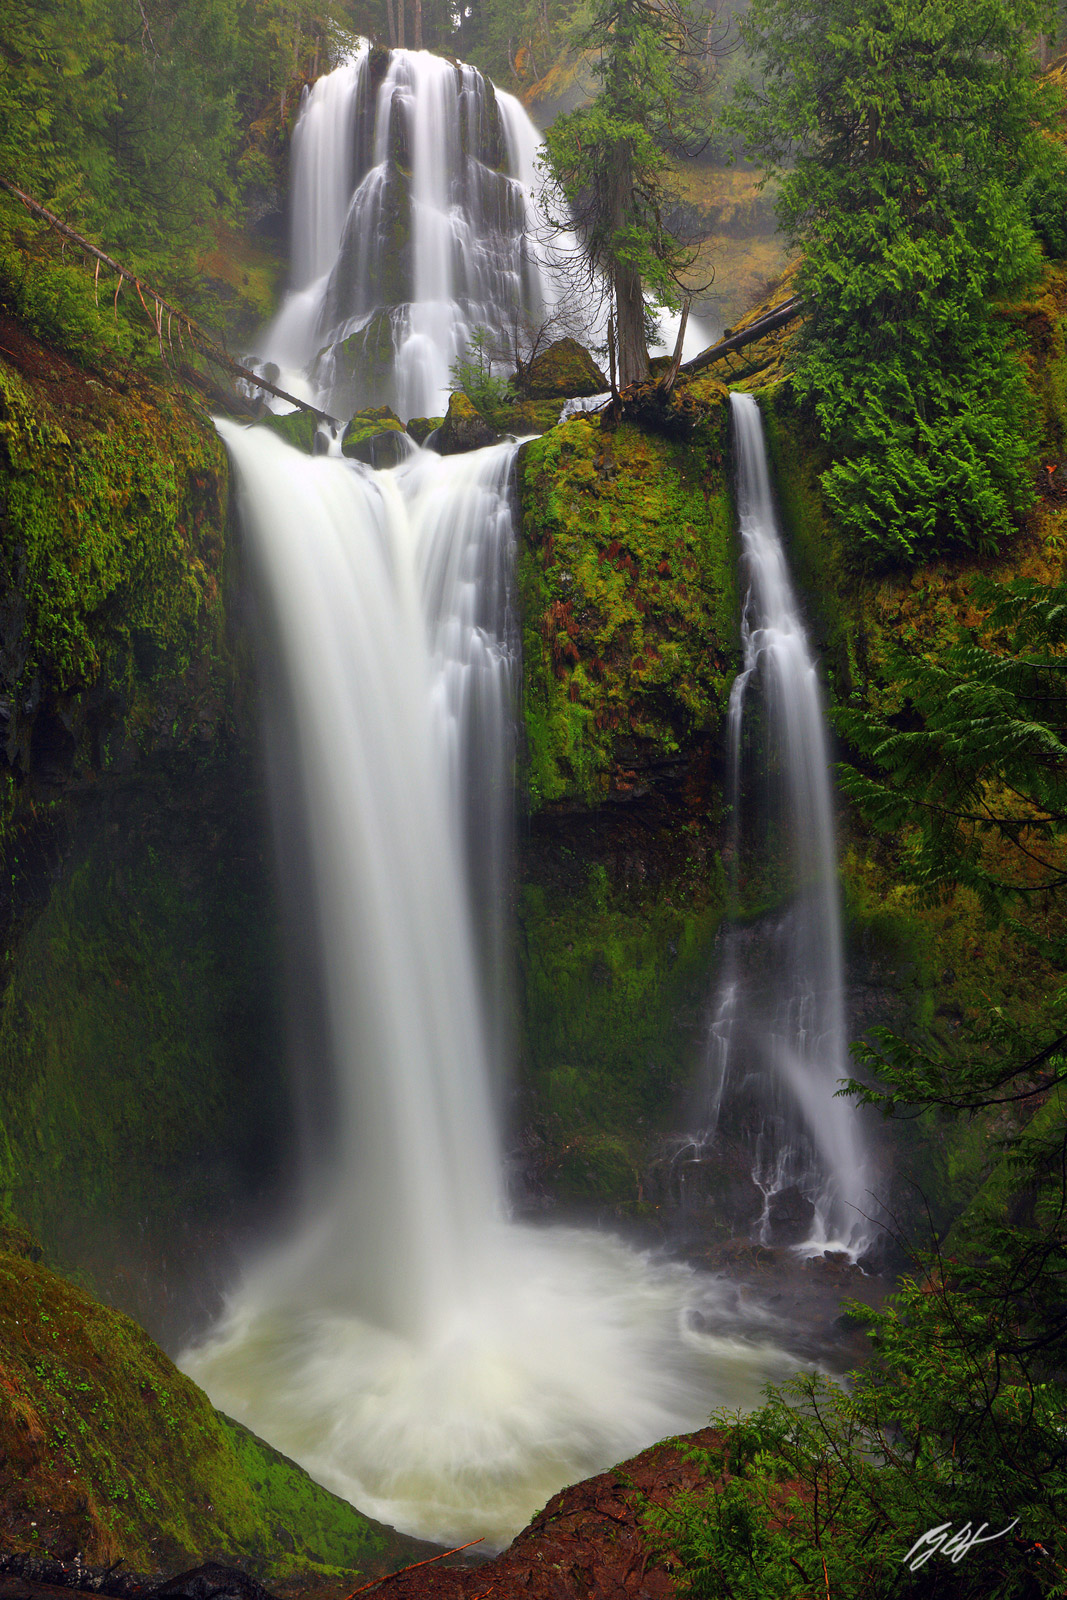 Thundering Falls Creek Falls in the Gifford Pinchot National Forest in Southern Washington